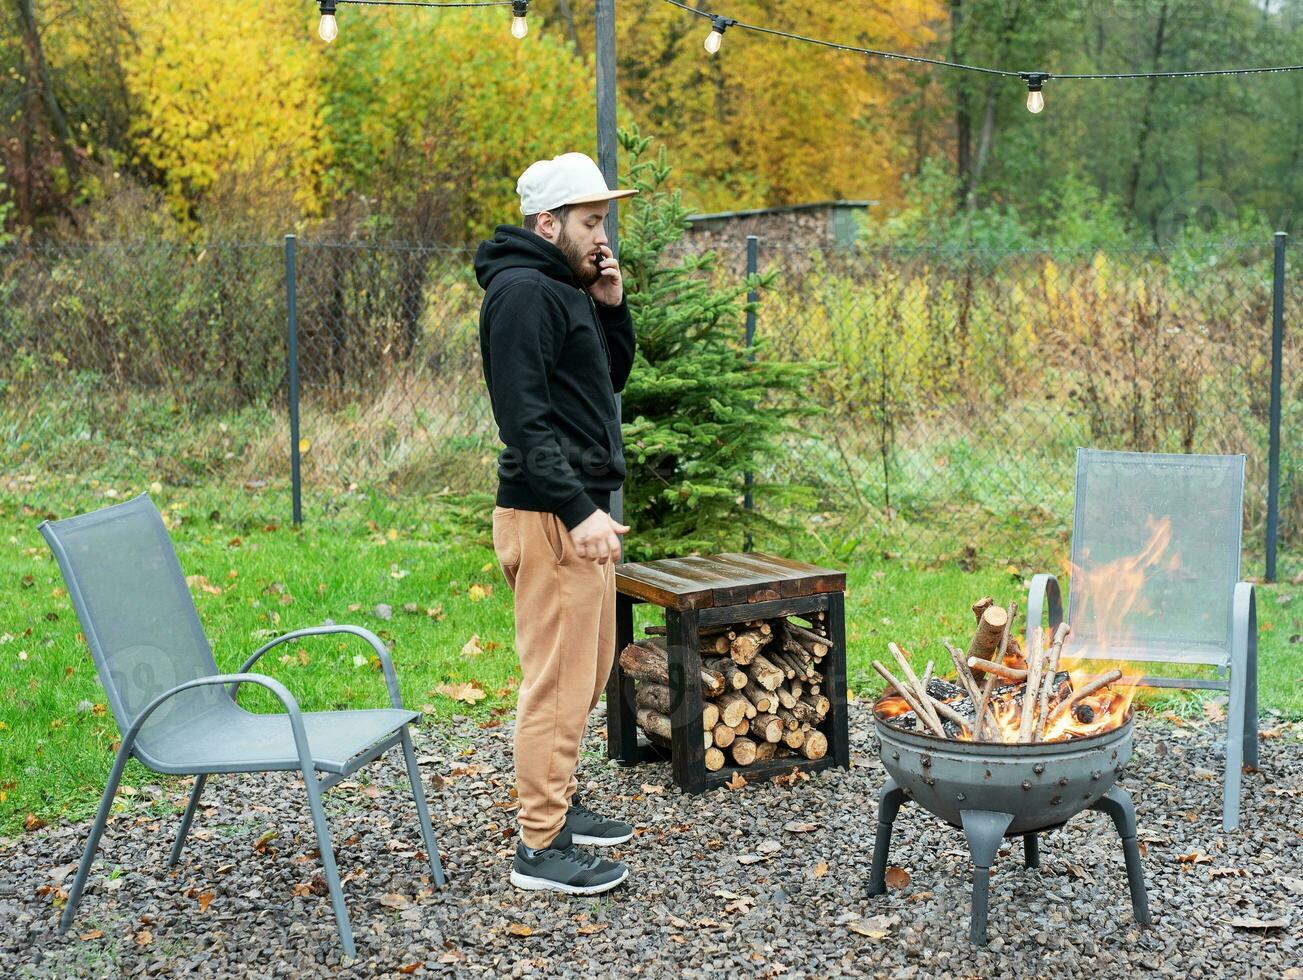 A man lights a barbecue in nature photo